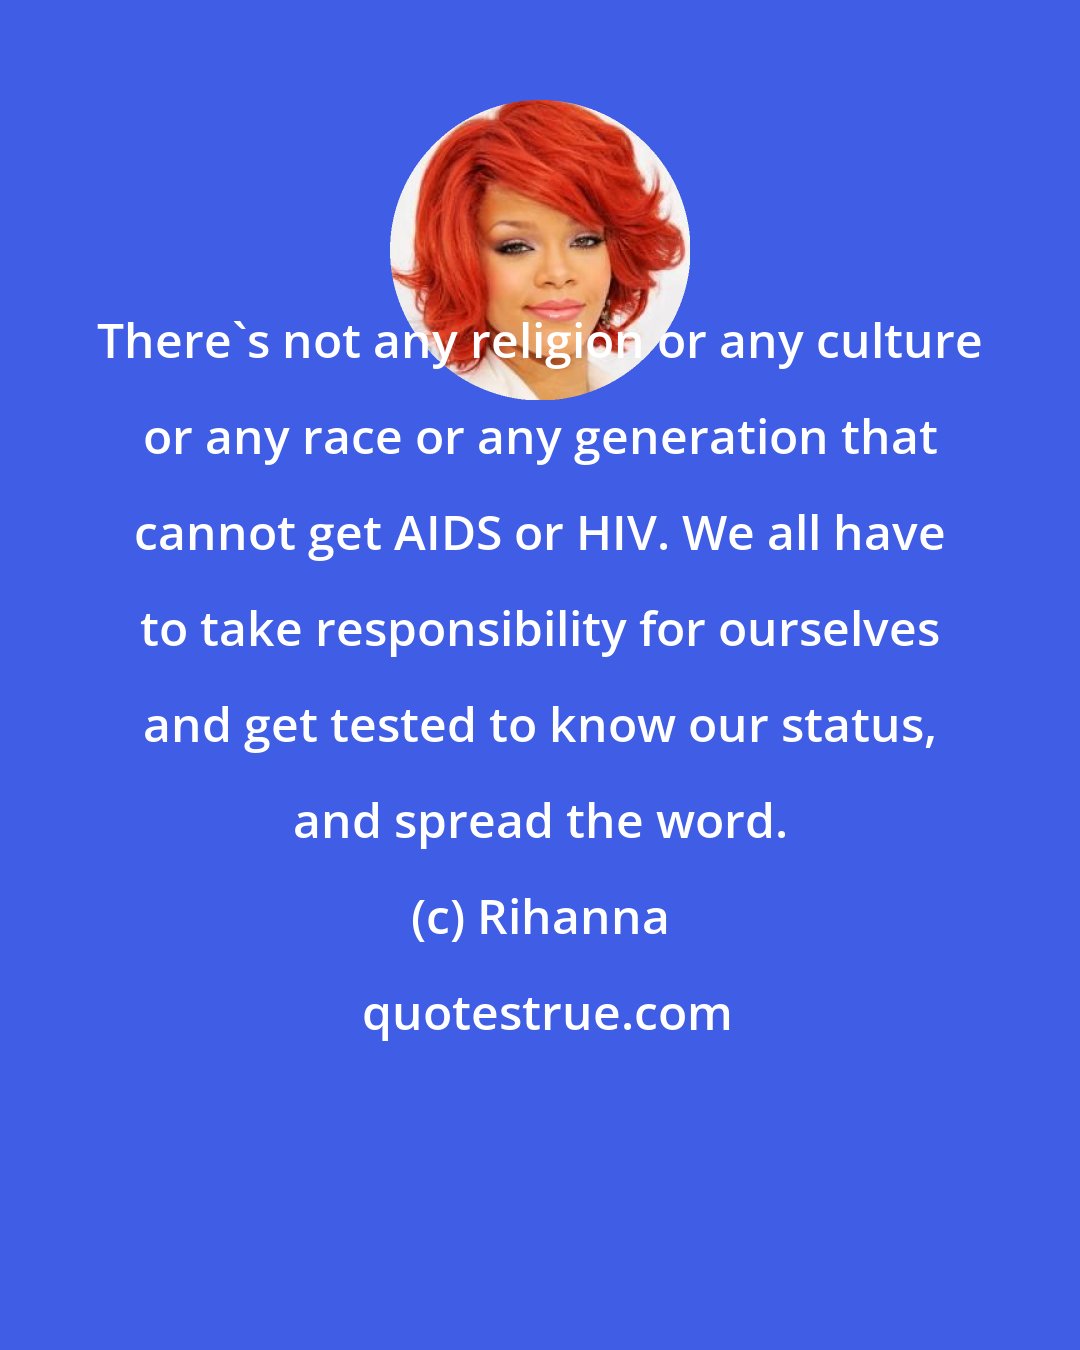 Rihanna: There's not any religion or any culture or any race or any generation that cannot get AIDS or HIV. We all have to take responsibility for ourselves and get tested to know our status, and spread the word.